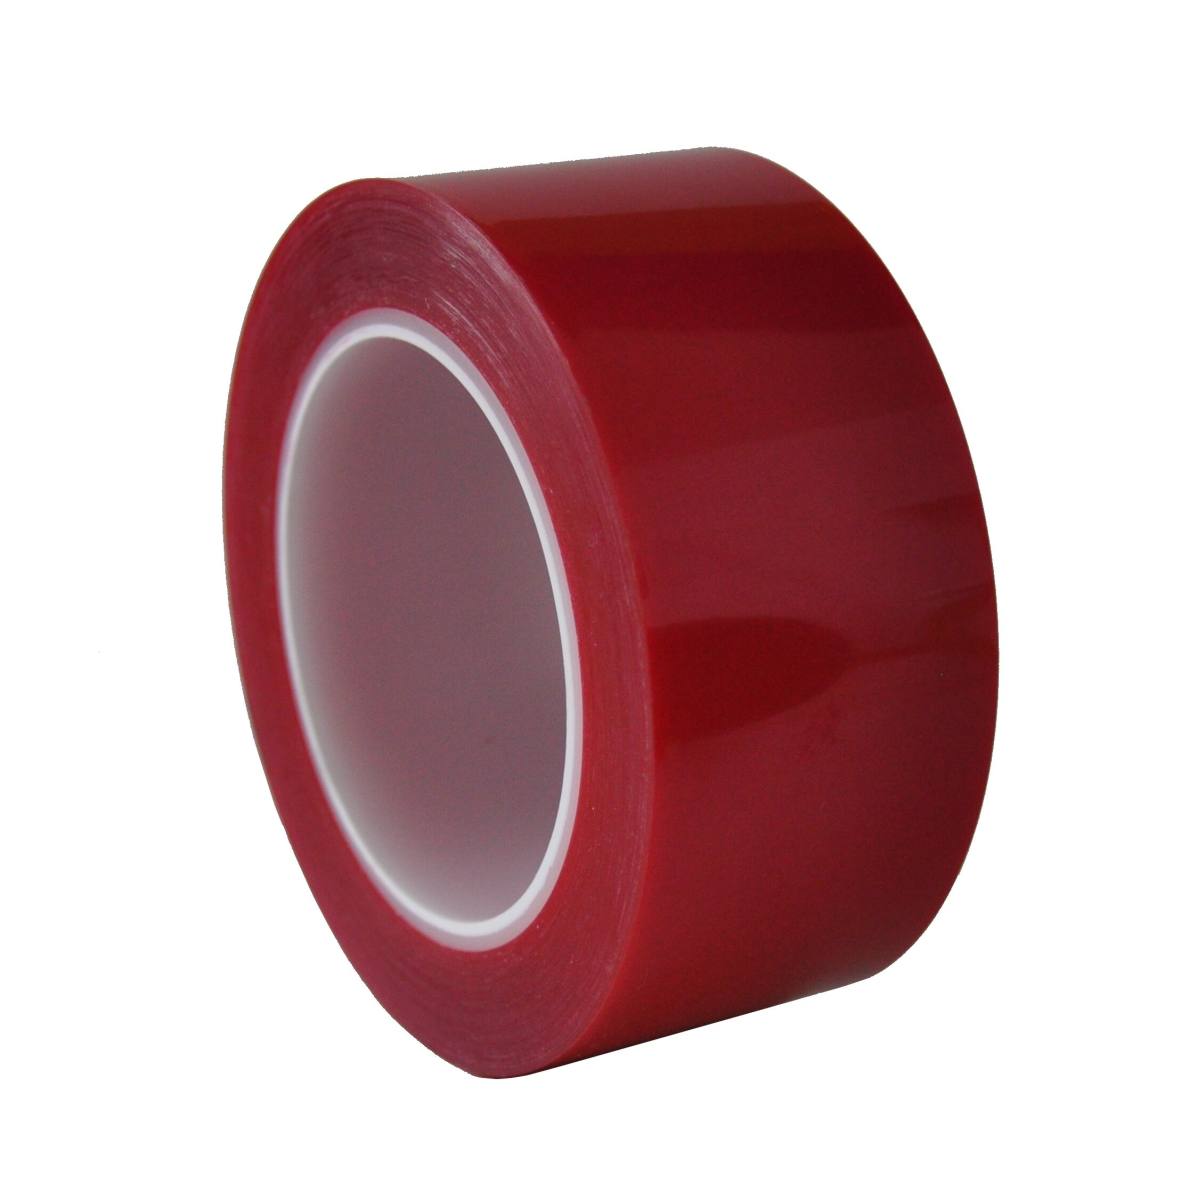 S-K-S 208R Polyester adhesive tape, 75mmx66m, red